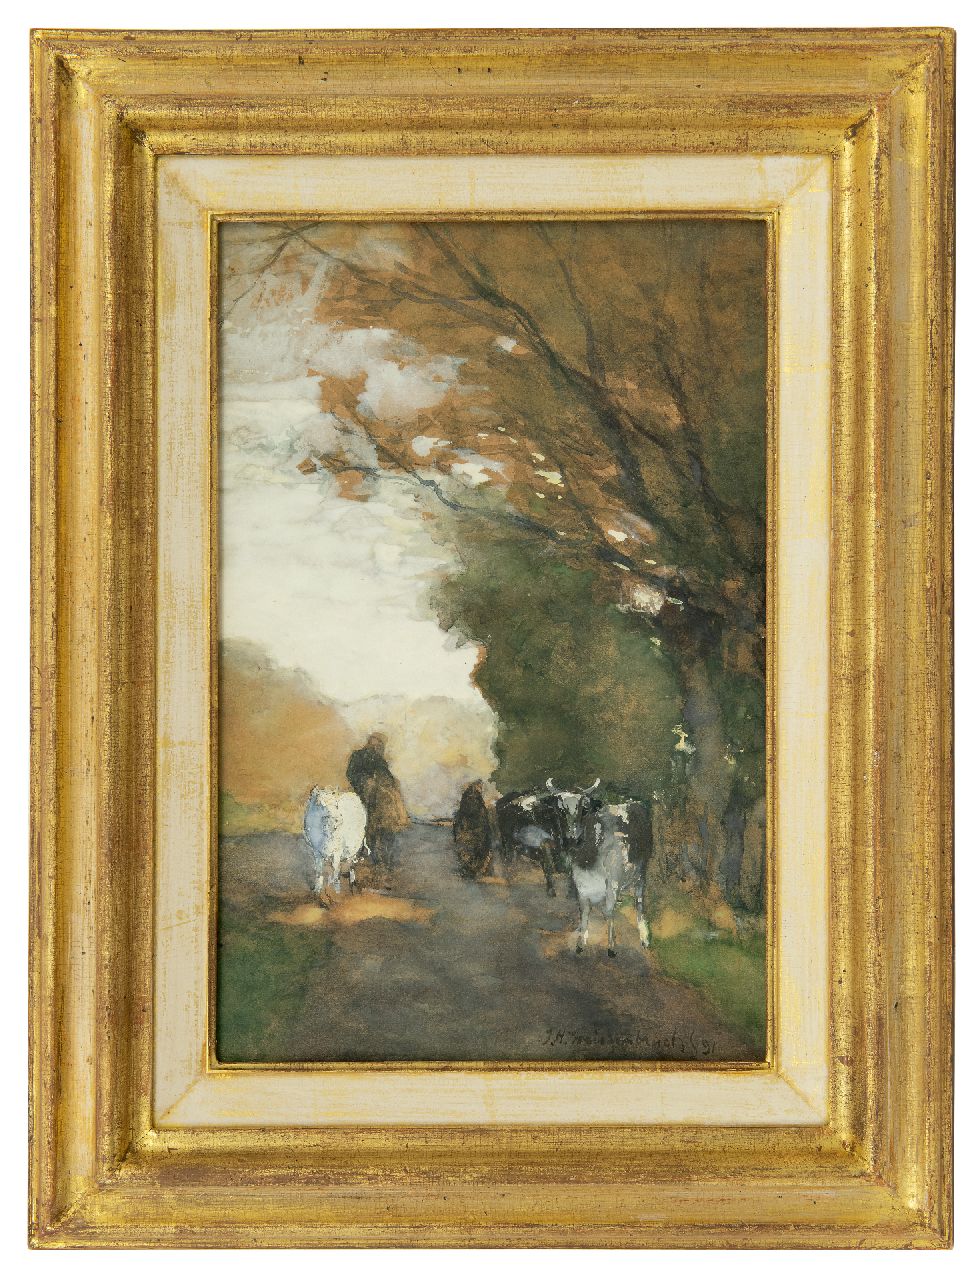 Weissenbruch H.J.  | Hendrik Johannes 'J.H.' Weissenbruch, Cows on a path along the edge of a forest, watercolour on paper 35.3 x 22.8 cm, signed l.r. and dated '91